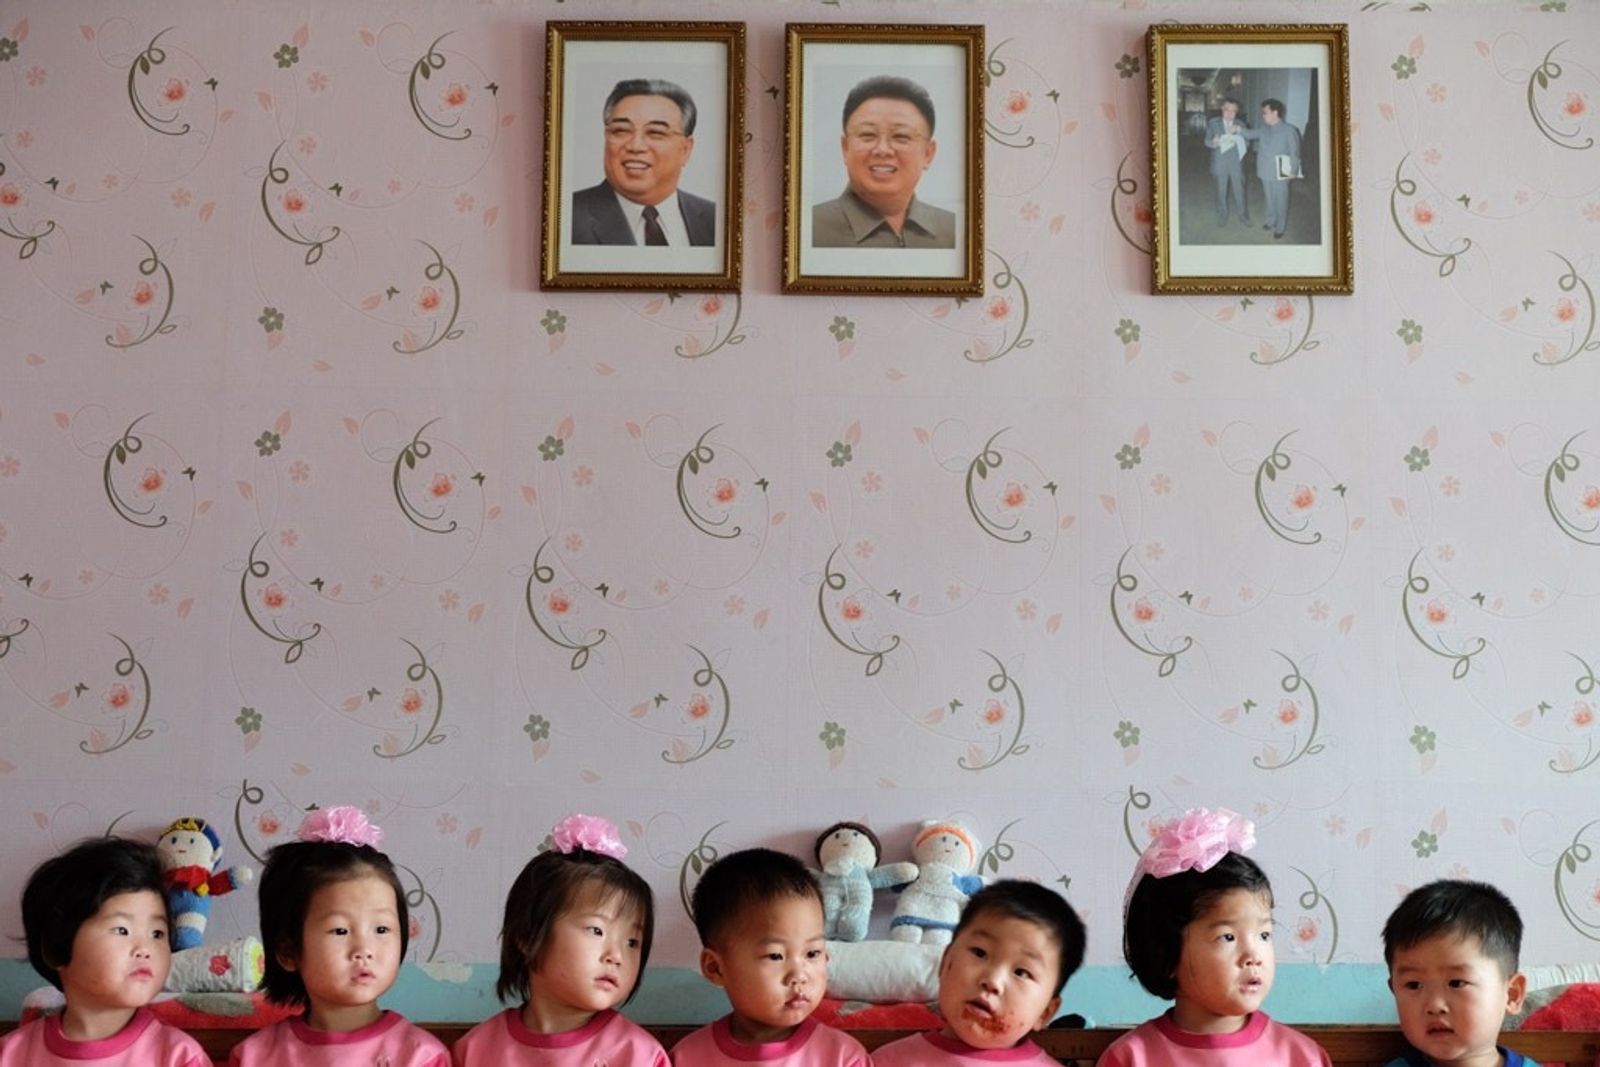 © Fabian Muir, from the series, Searching for North Korea